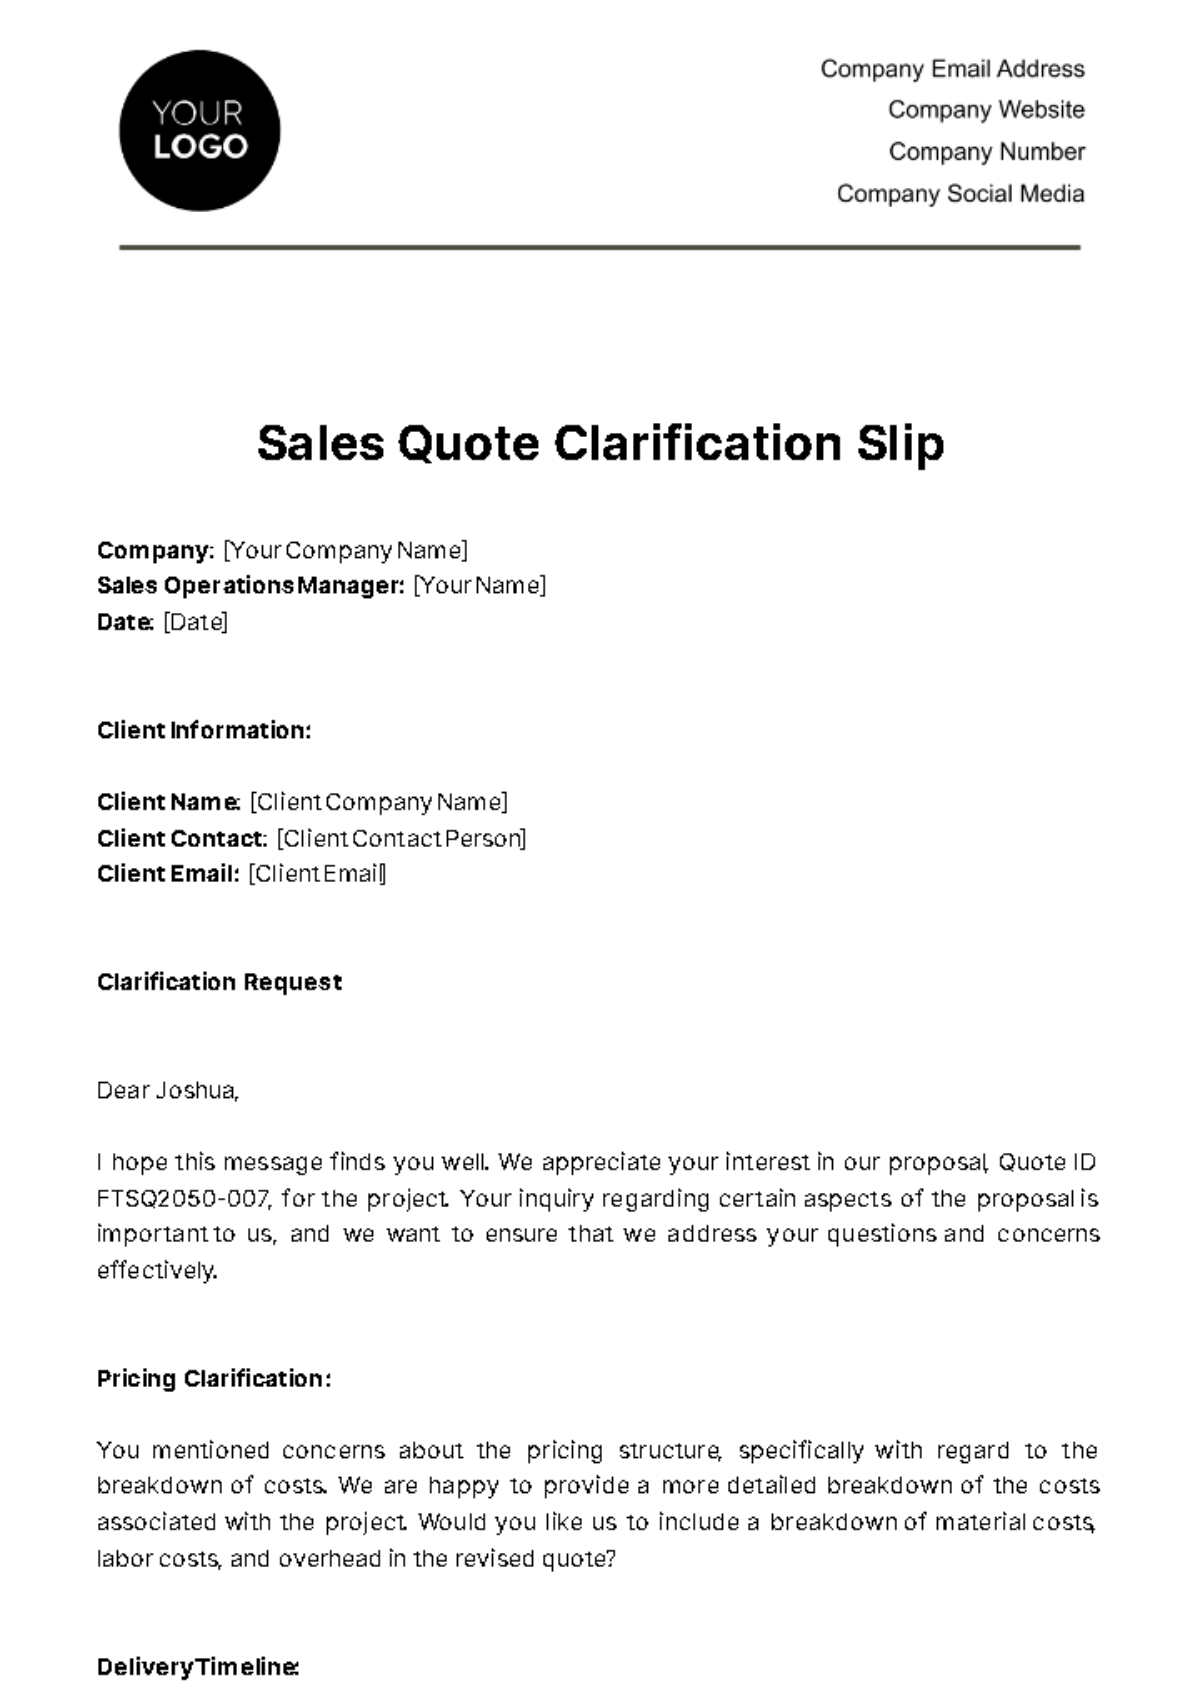 Free Sales Quote Clarification Slip Template